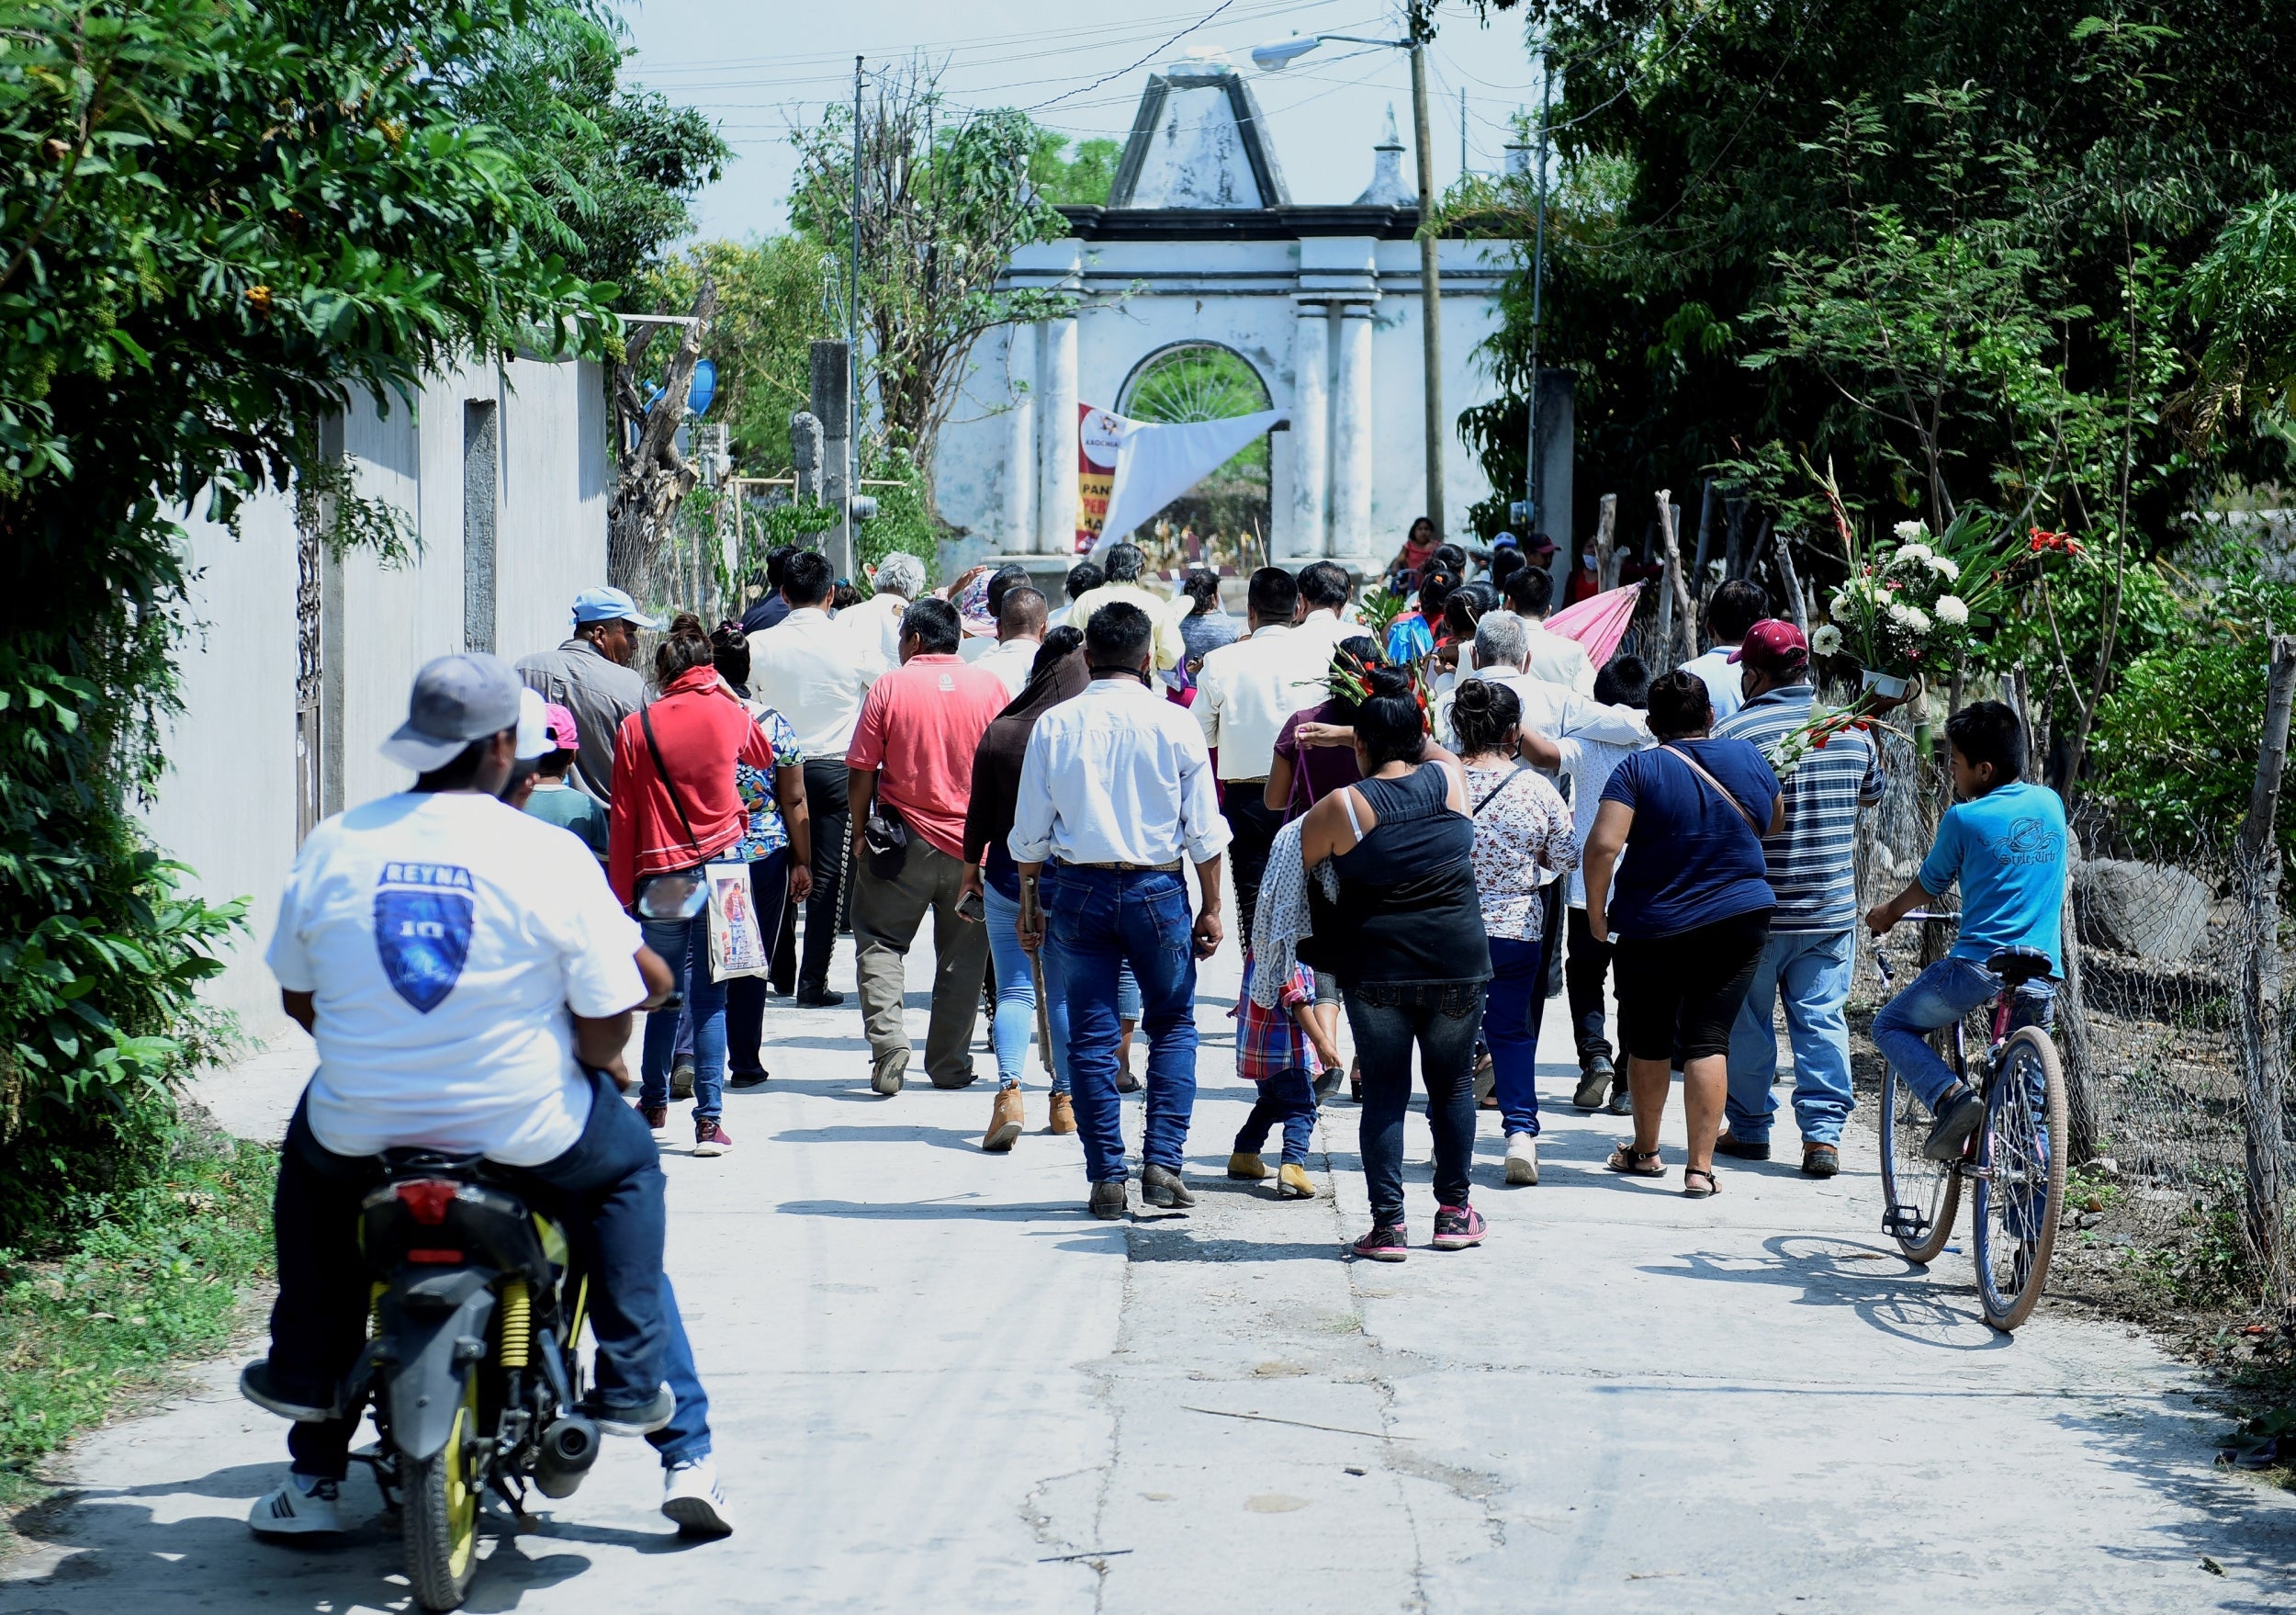 Members of the indigenous Telixtac community move the remains of a person who died after drinking allegedly adulterated alcohol in Morelos, Mexico